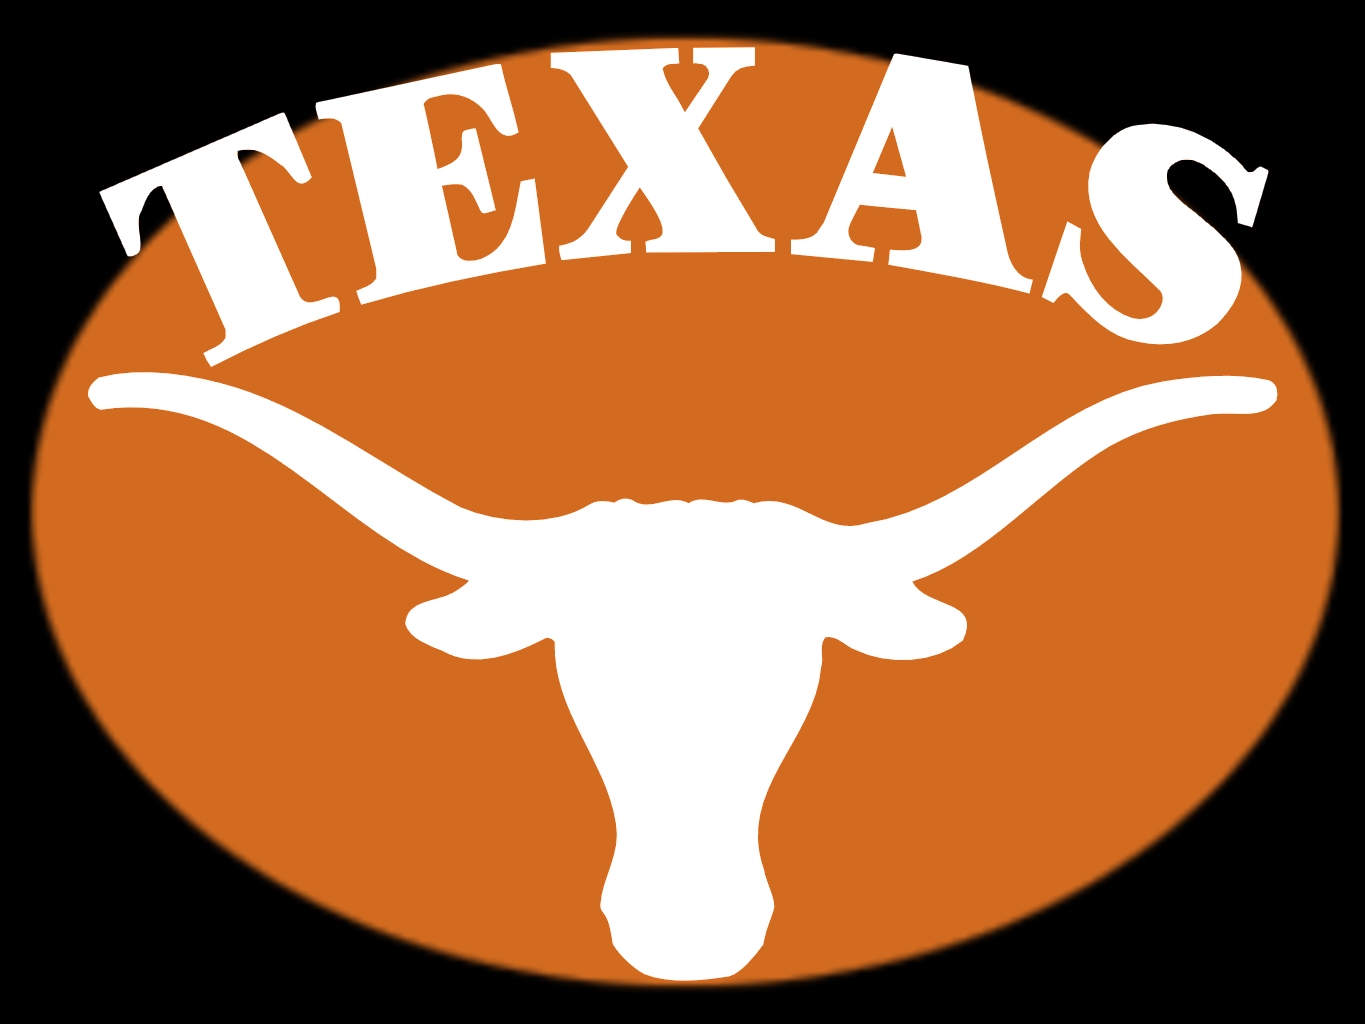 Cool Texas Longhorn Logo Made PC Android iPhone and iPad Wallpapers